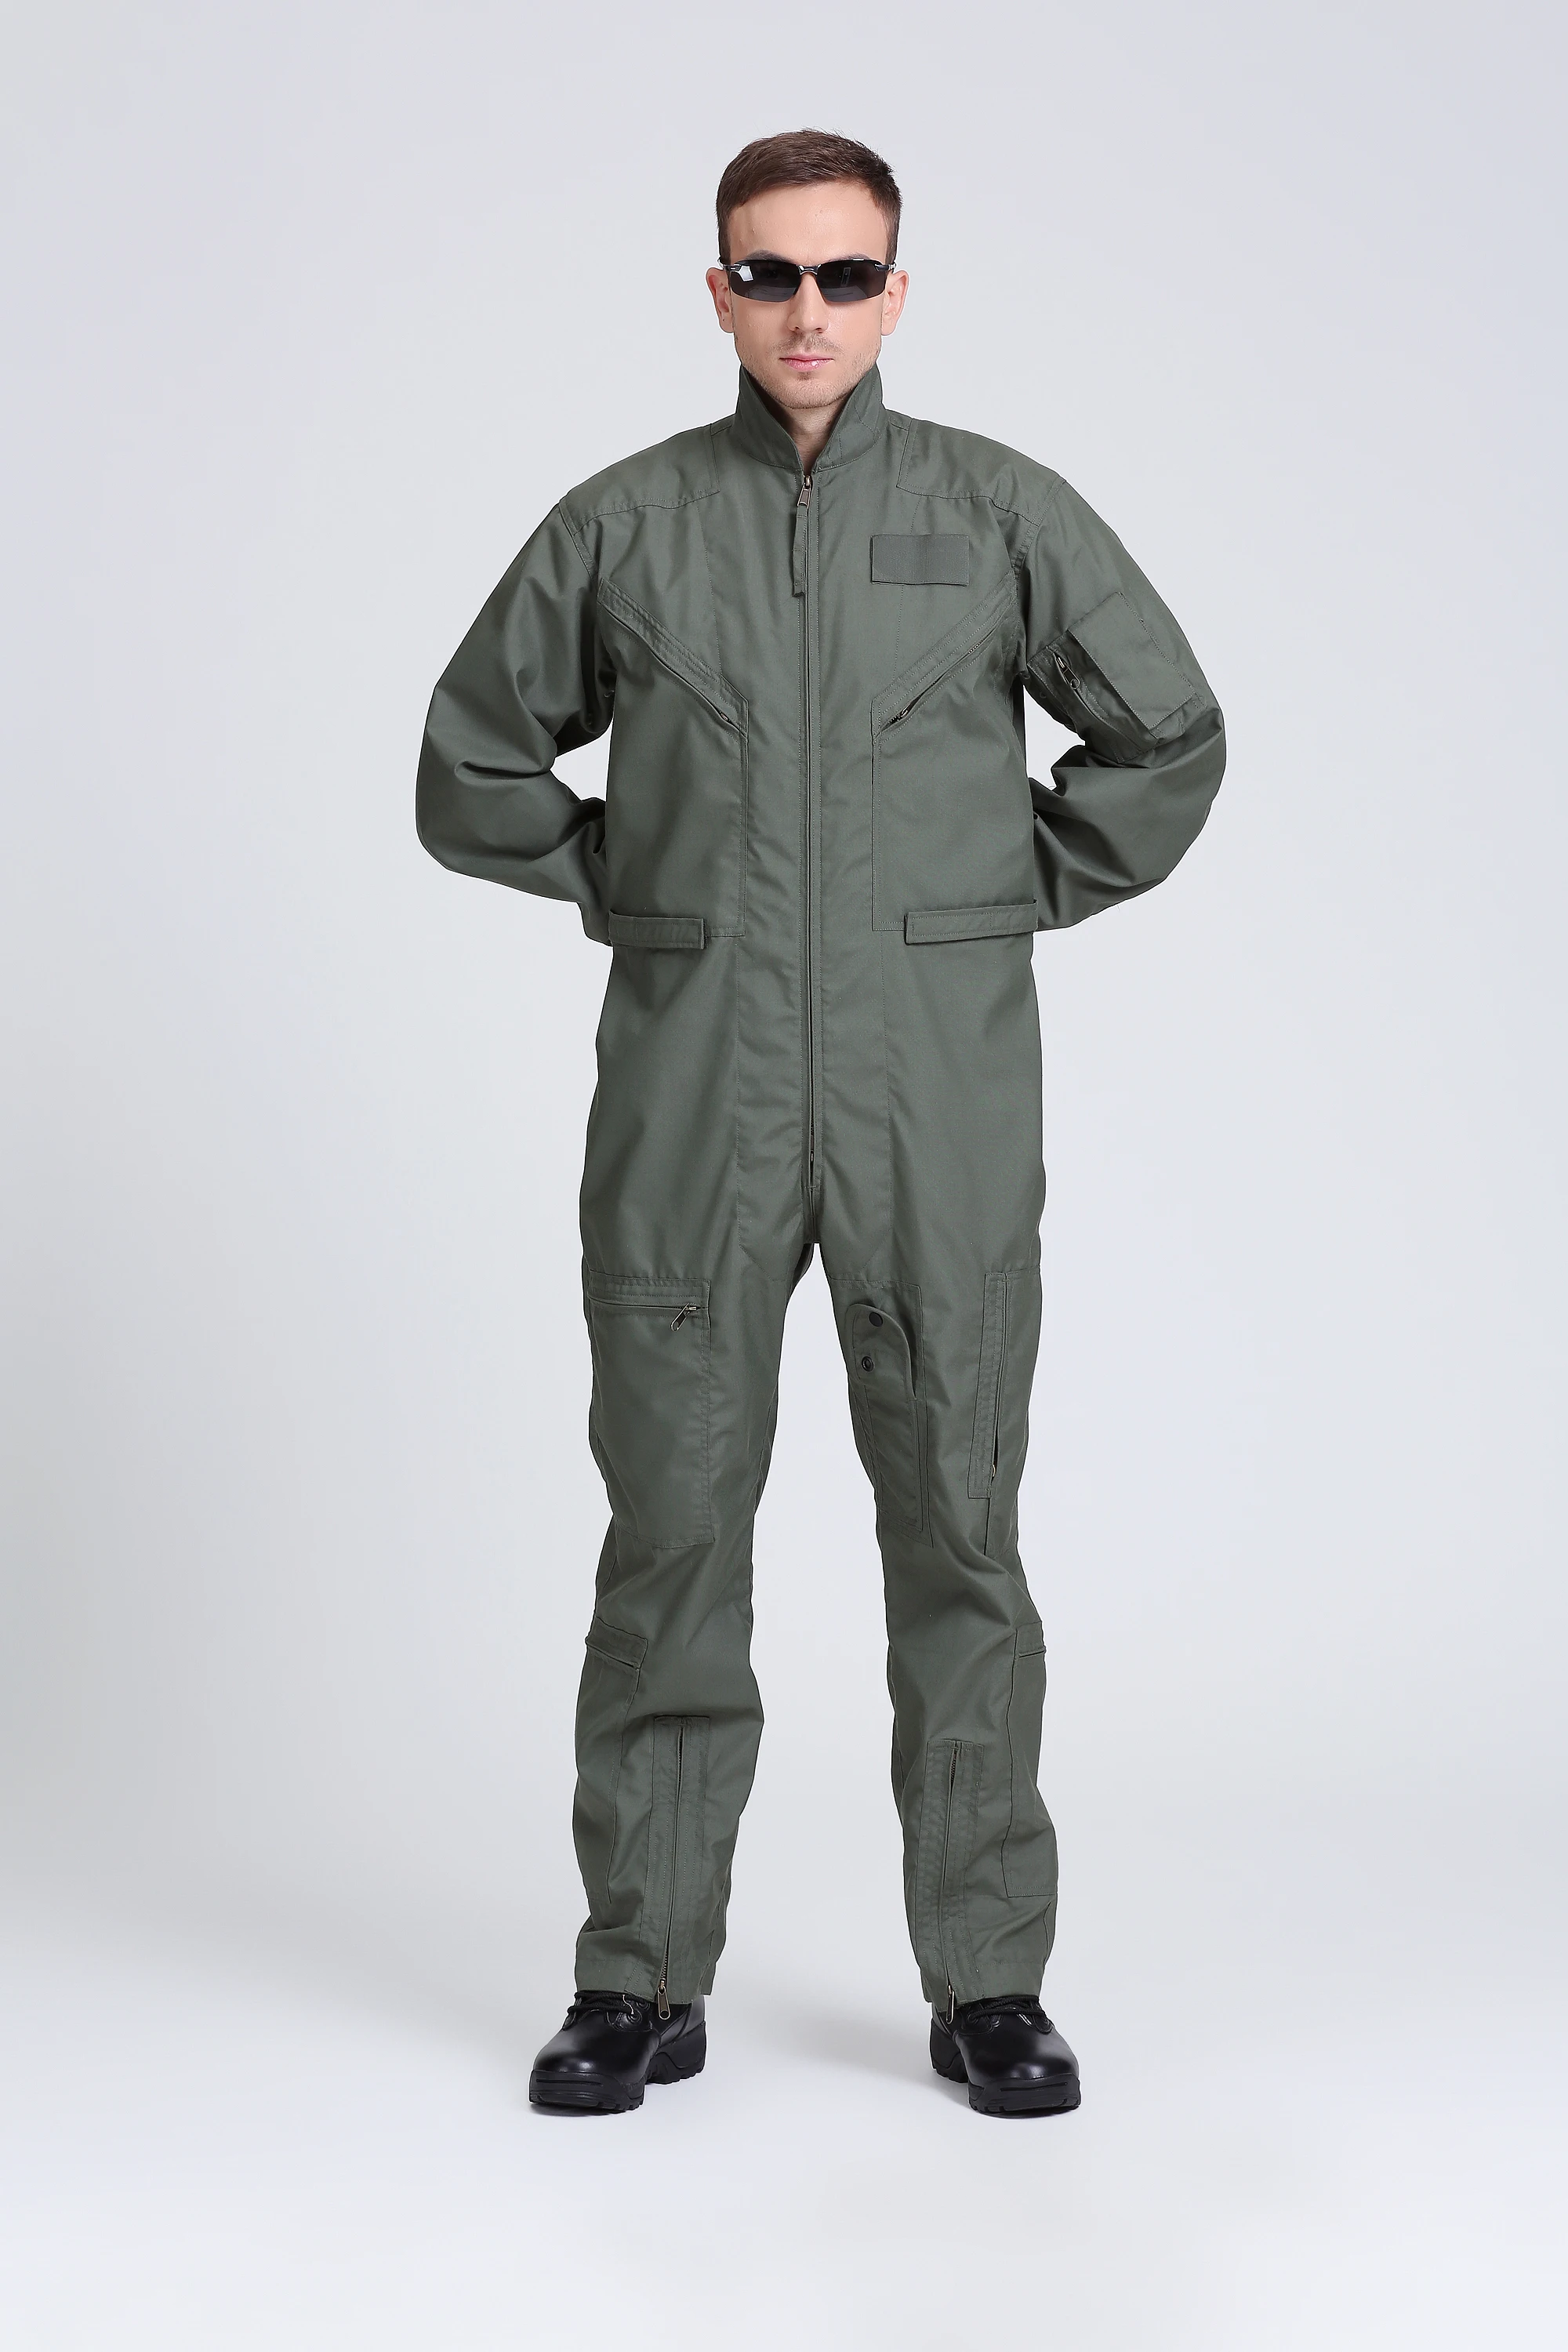 High Quality Durable Military Green Flying Suit Military Pilot Coverall